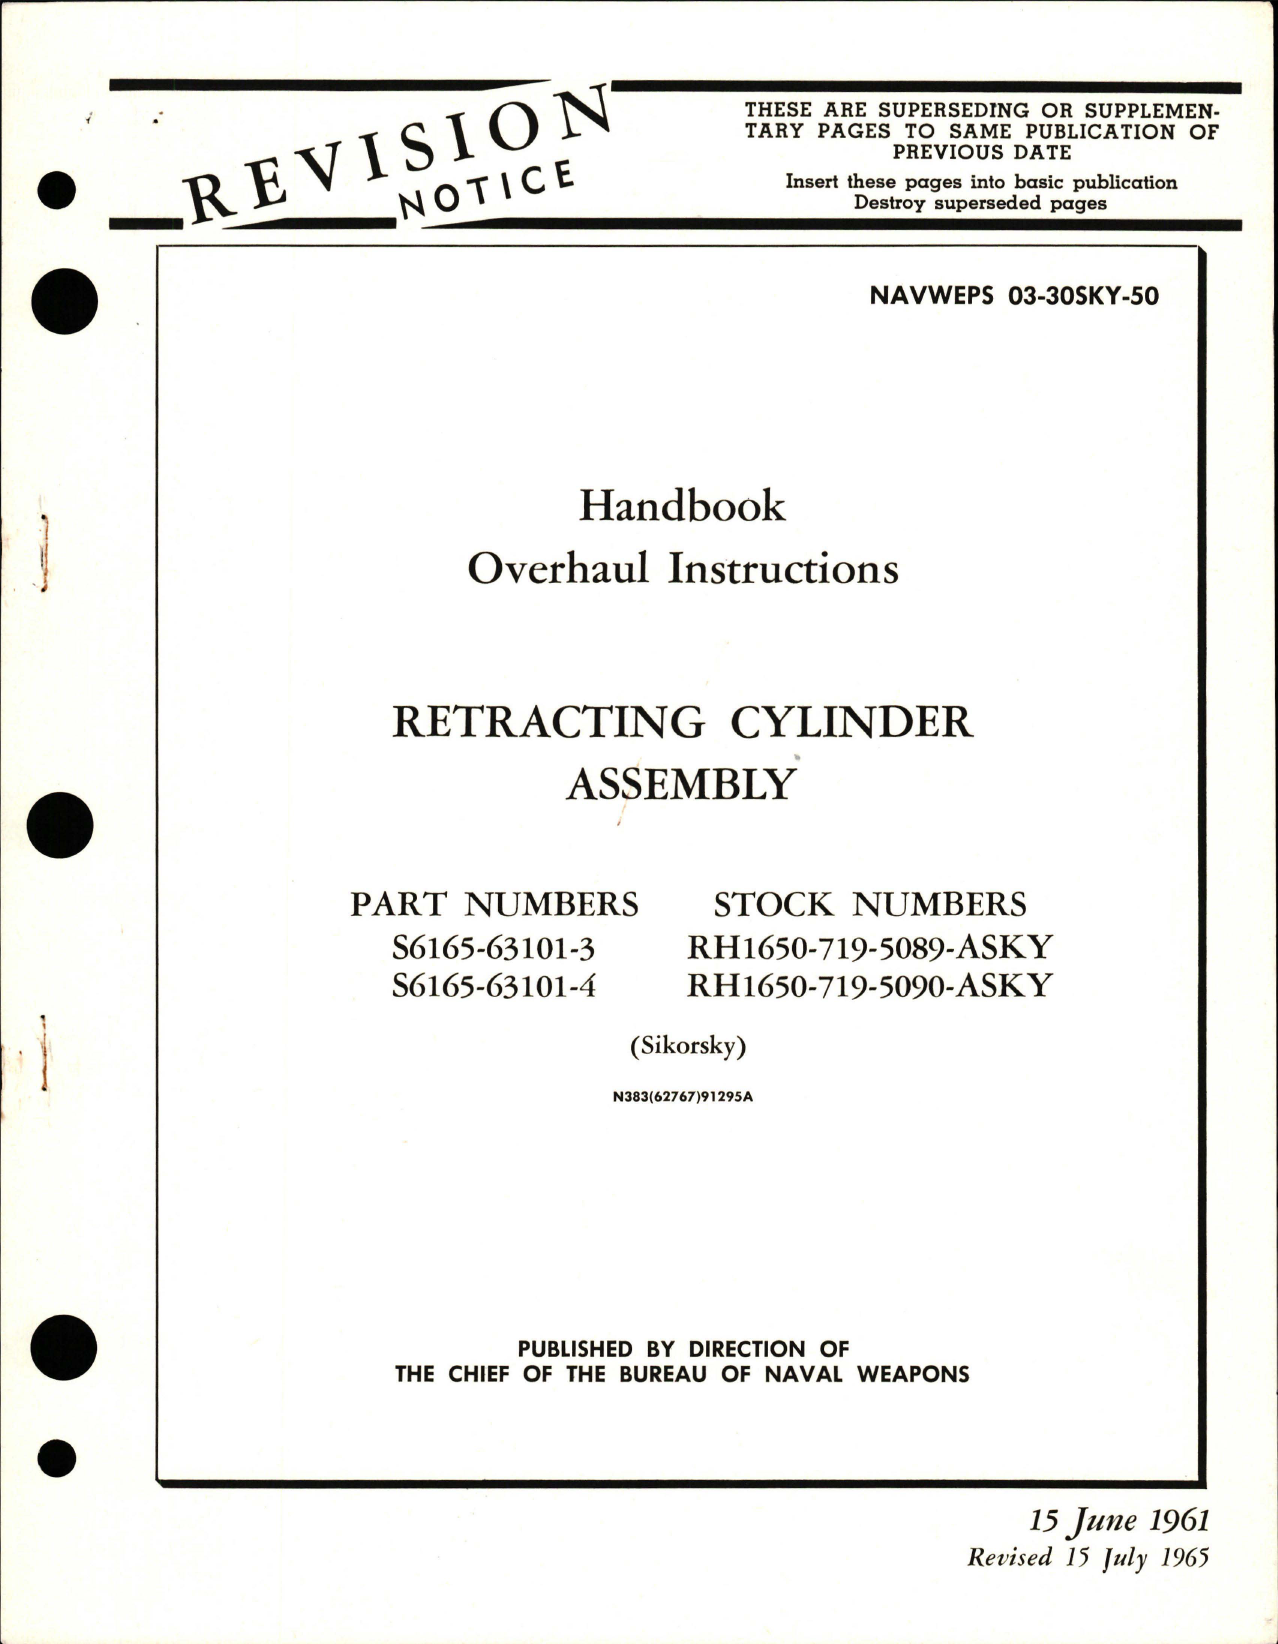 Sample page 1 from AirCorps Library document: Overhaul Instructions for Retracting Cylinder Assembly - Parts S6165-63101-3 and S6165-63101-4